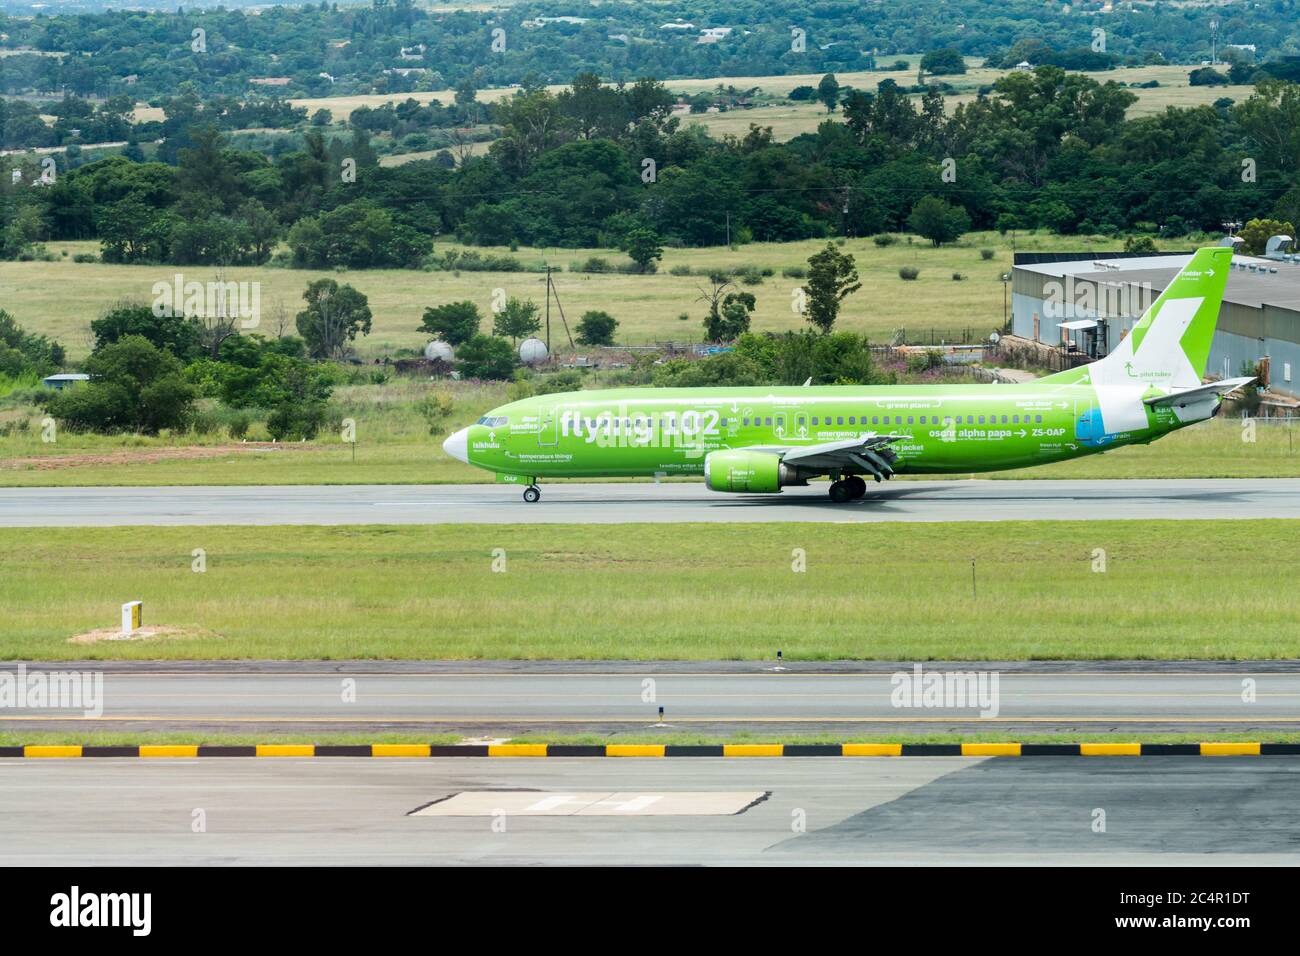 Kulula.com airplane or plane stationary on the runway at Lanseria airport, Gauteng, South Africa Stock Photo